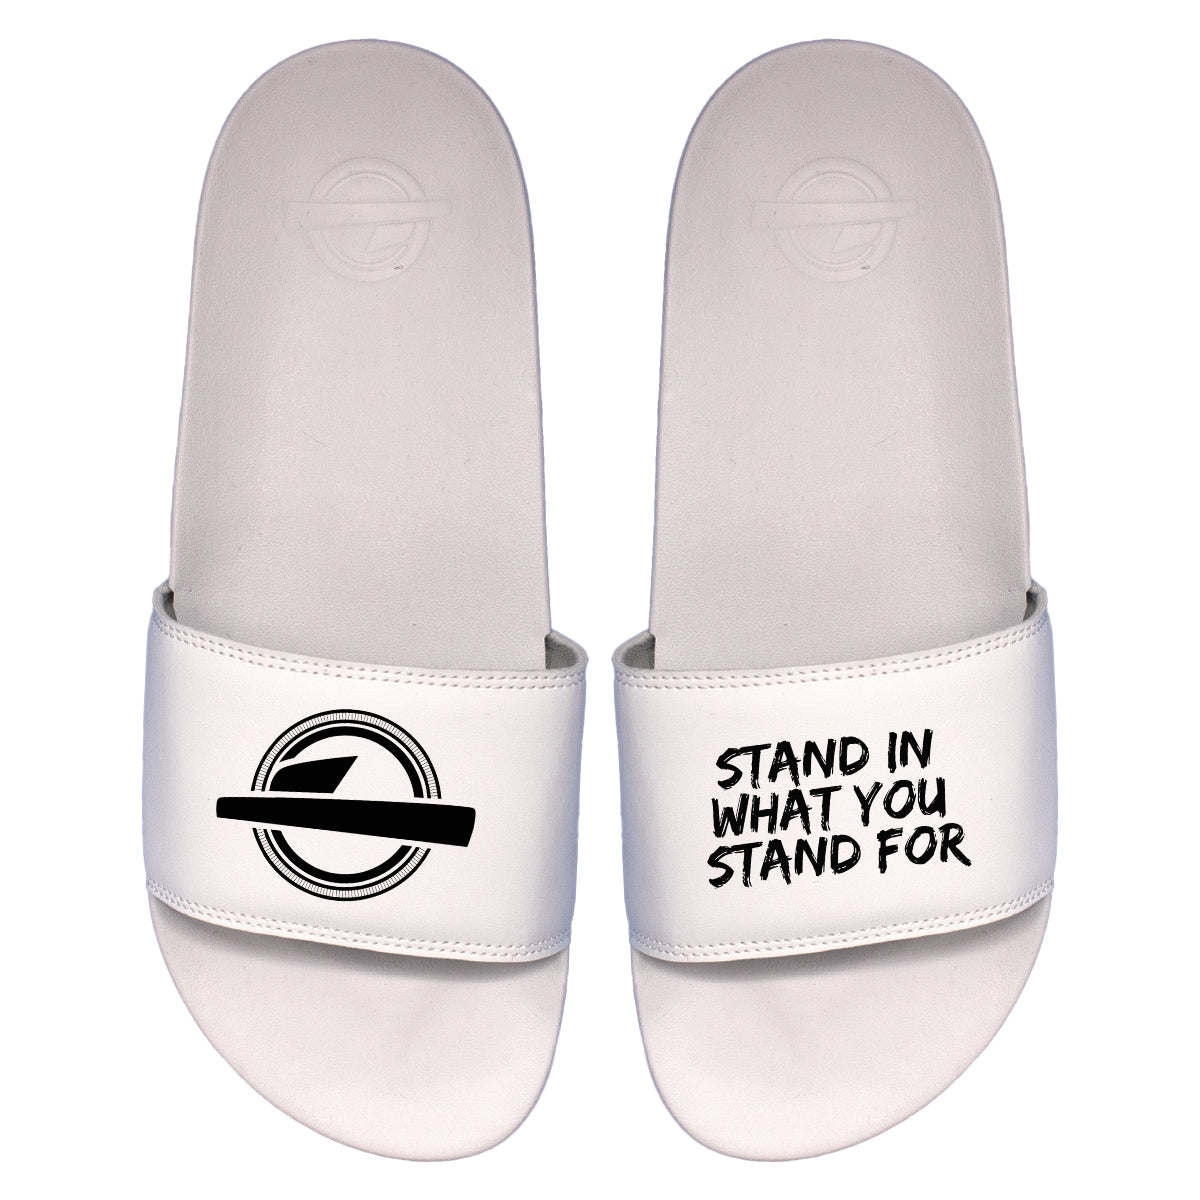 Stand In What You Stand For Motto Slides